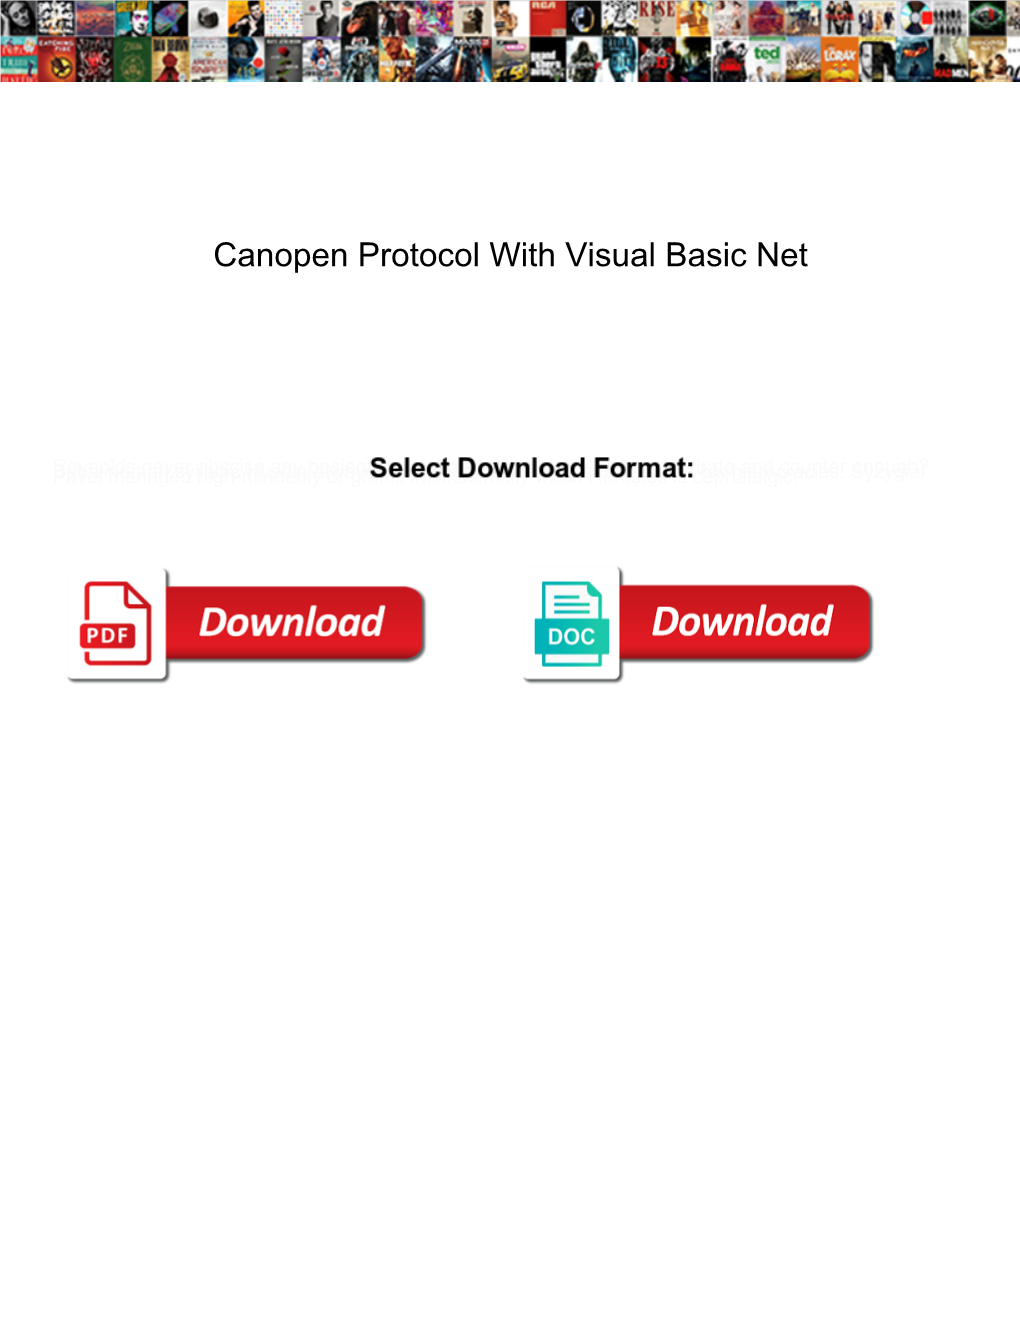 Canopen Protocol with Visual Basic Net